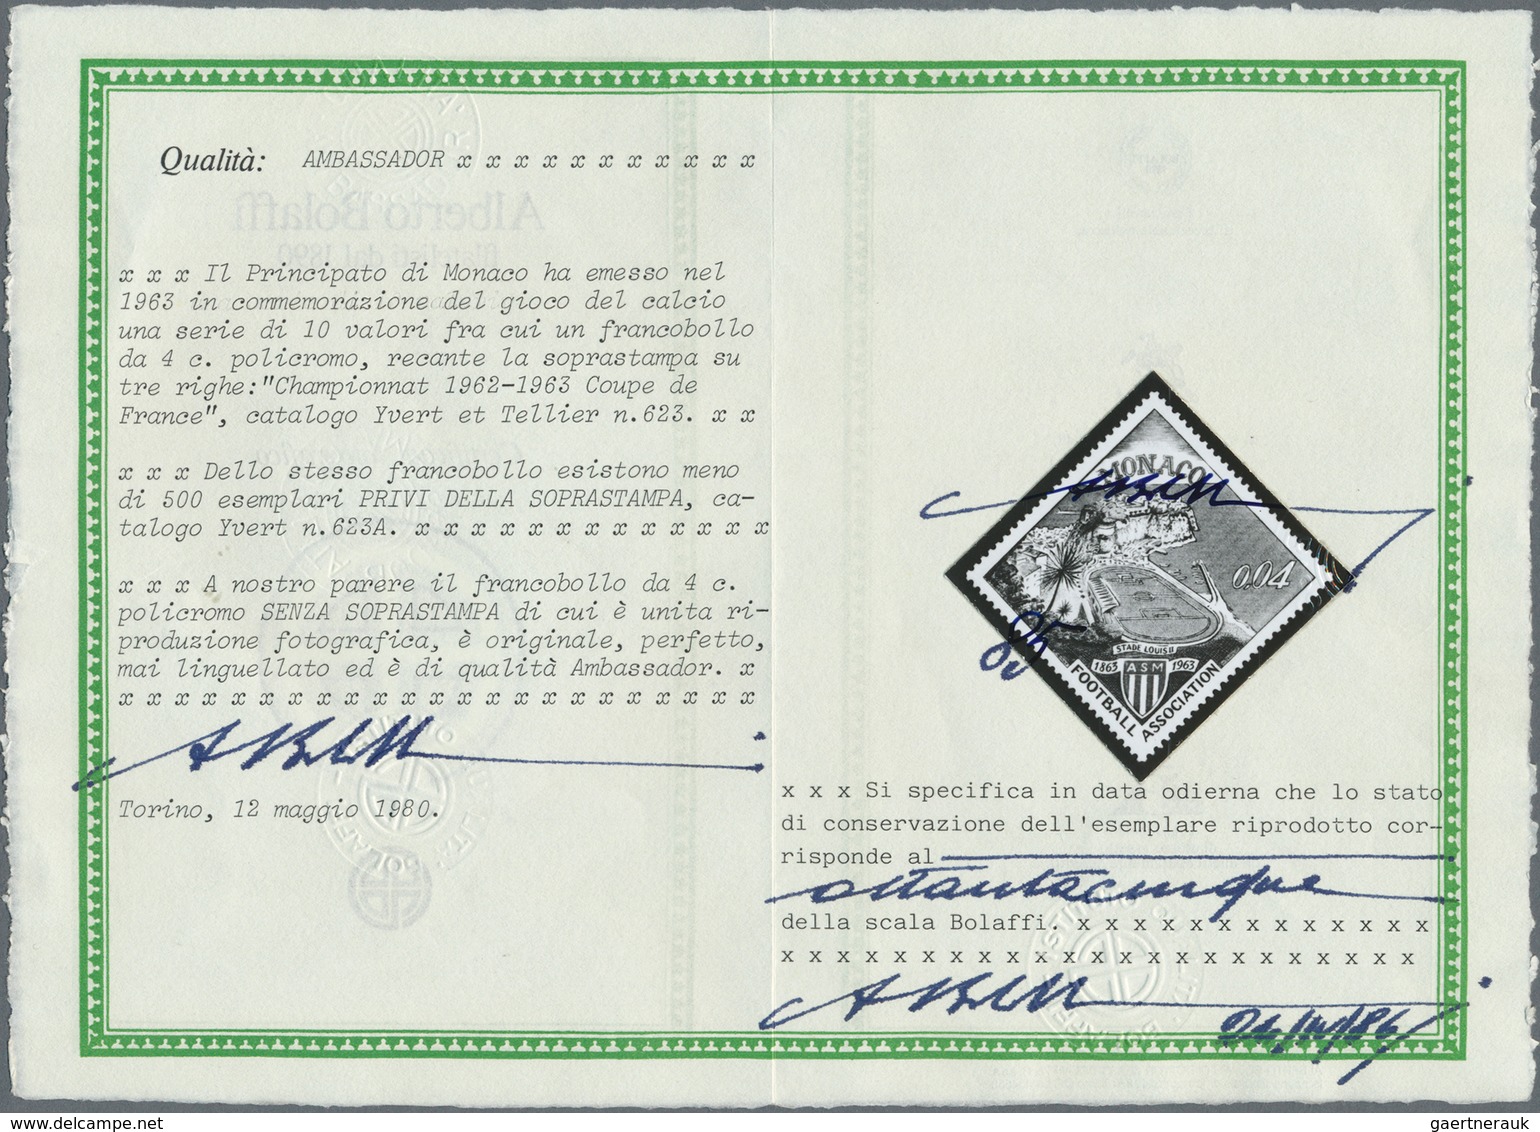 01547 Monaco: 1963, French Champion "AS Monaco", 0.04fr. Without Surcharge, Not Issued, Unmounted Mint, Ce - Unused Stamps